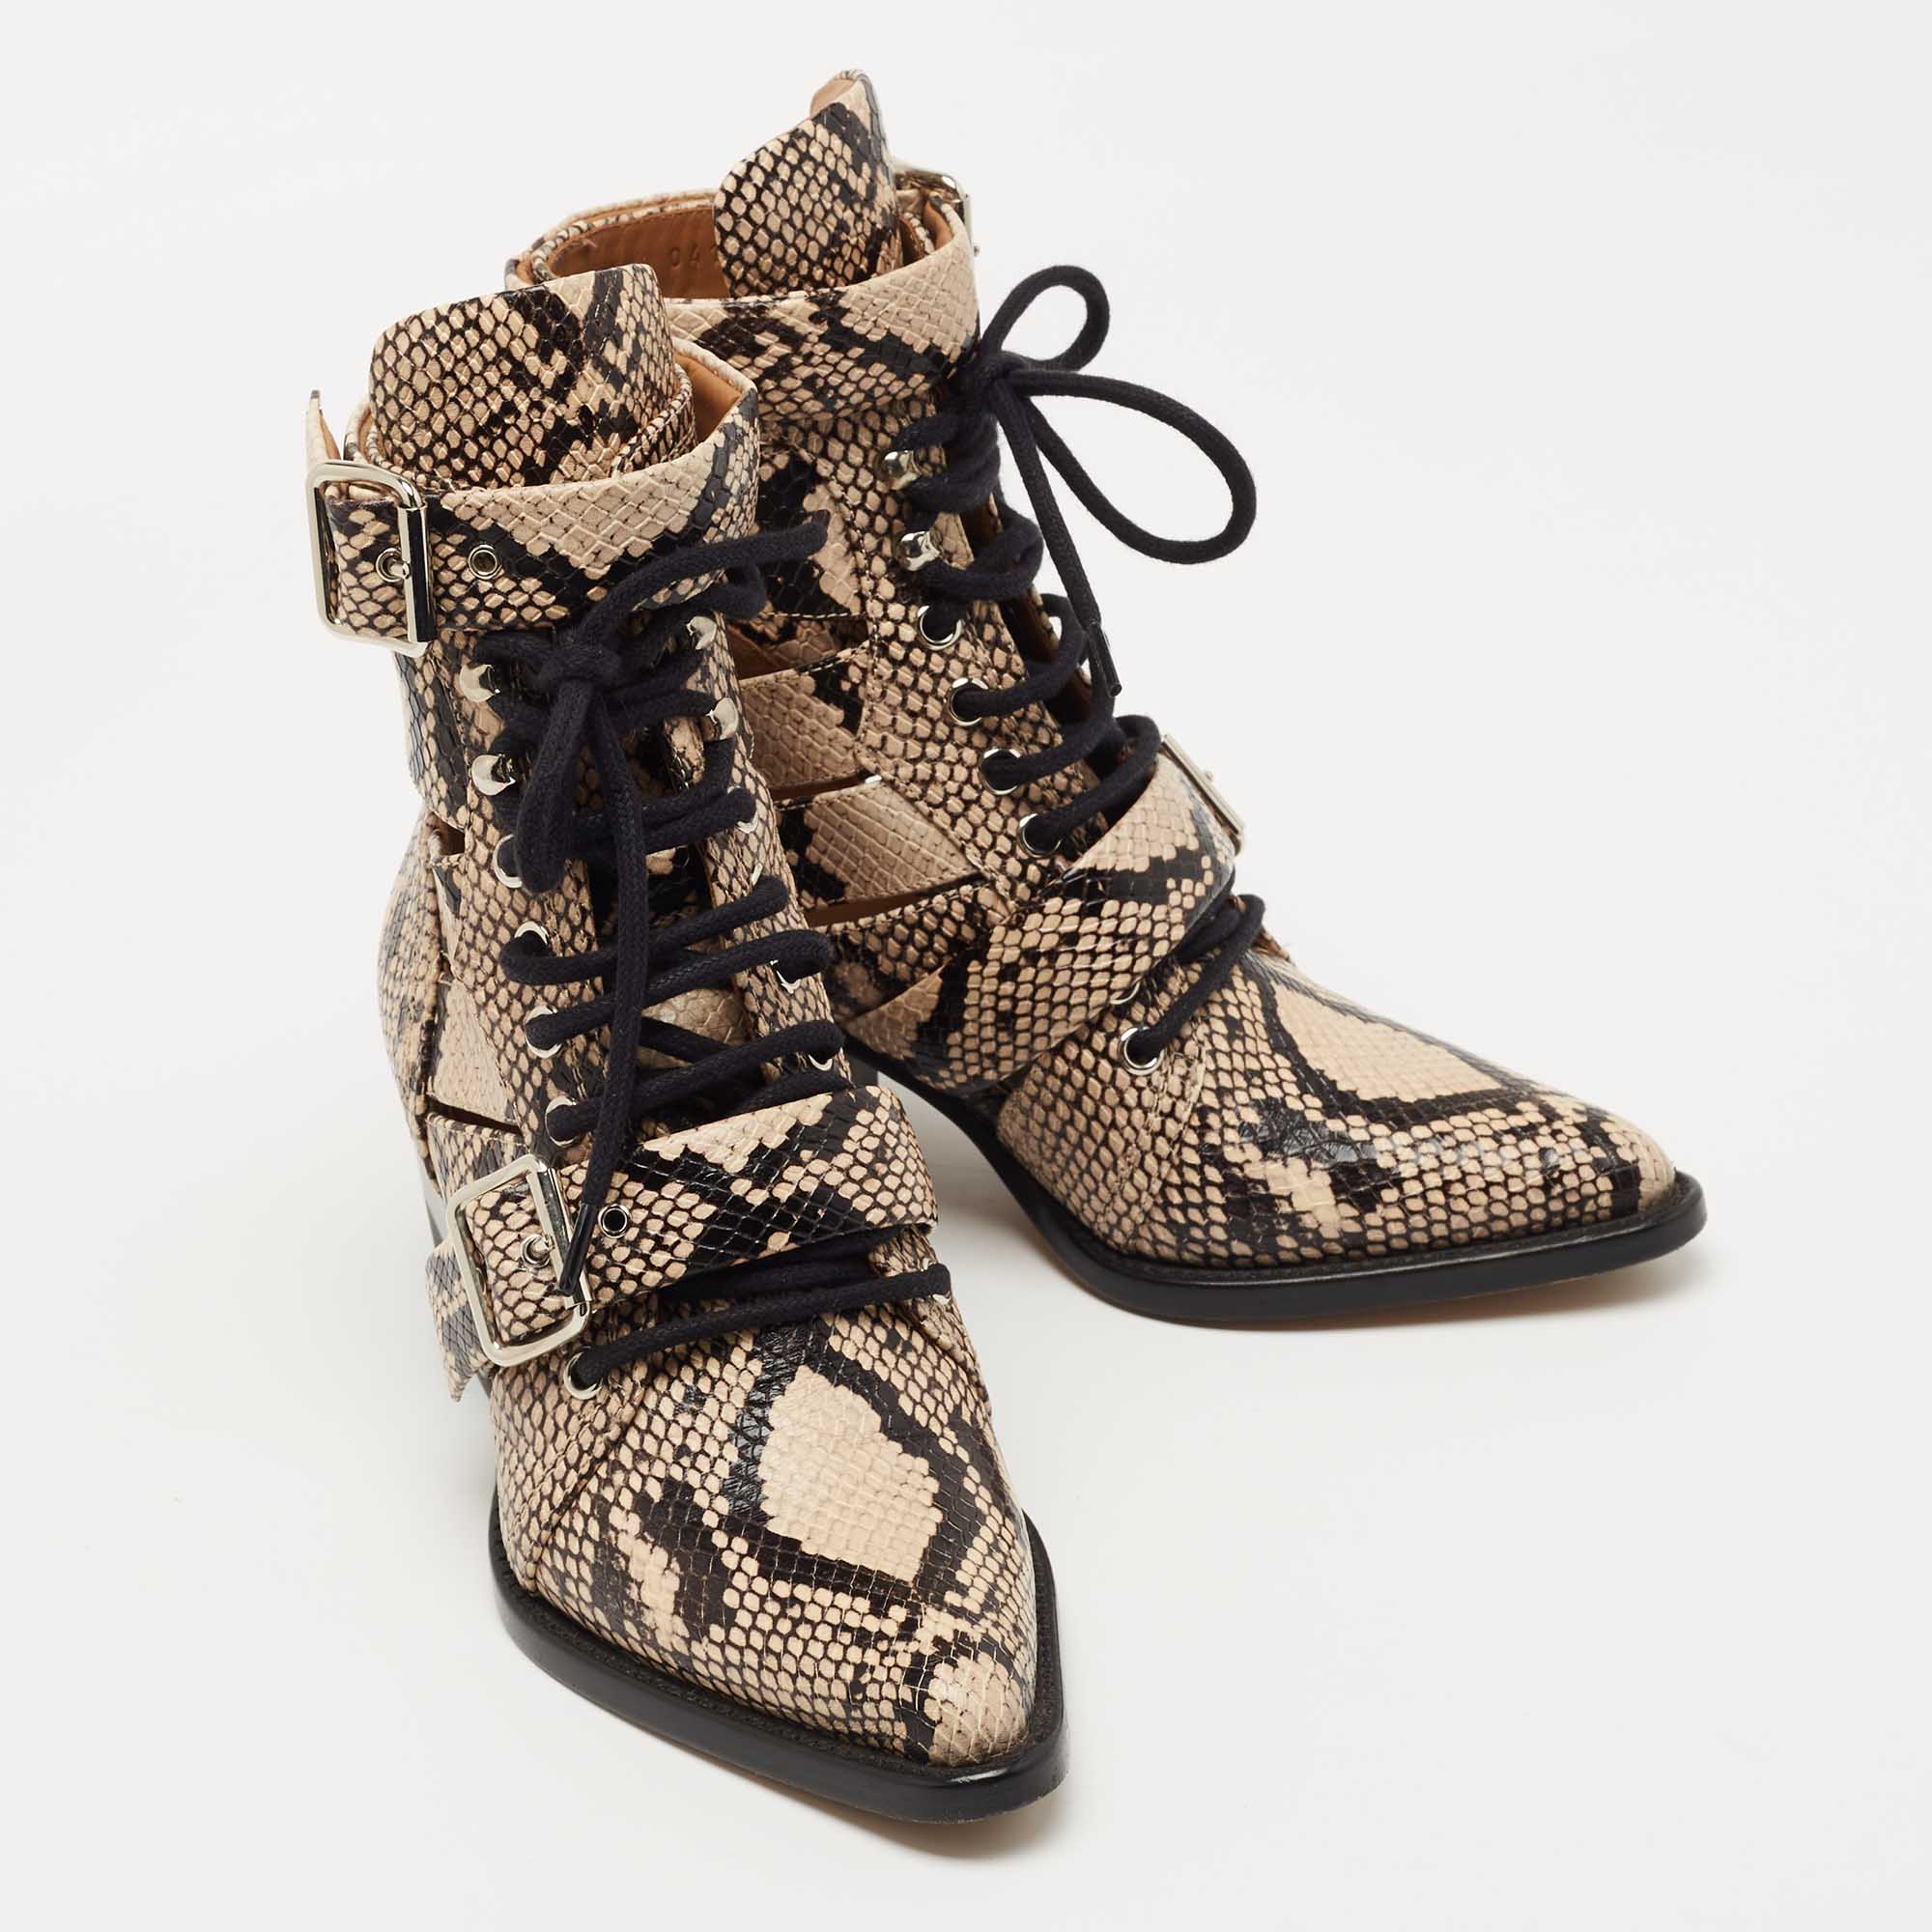 Chloe Brown/Black Python Embossed Leather Rylee Ankle Boots Size 36